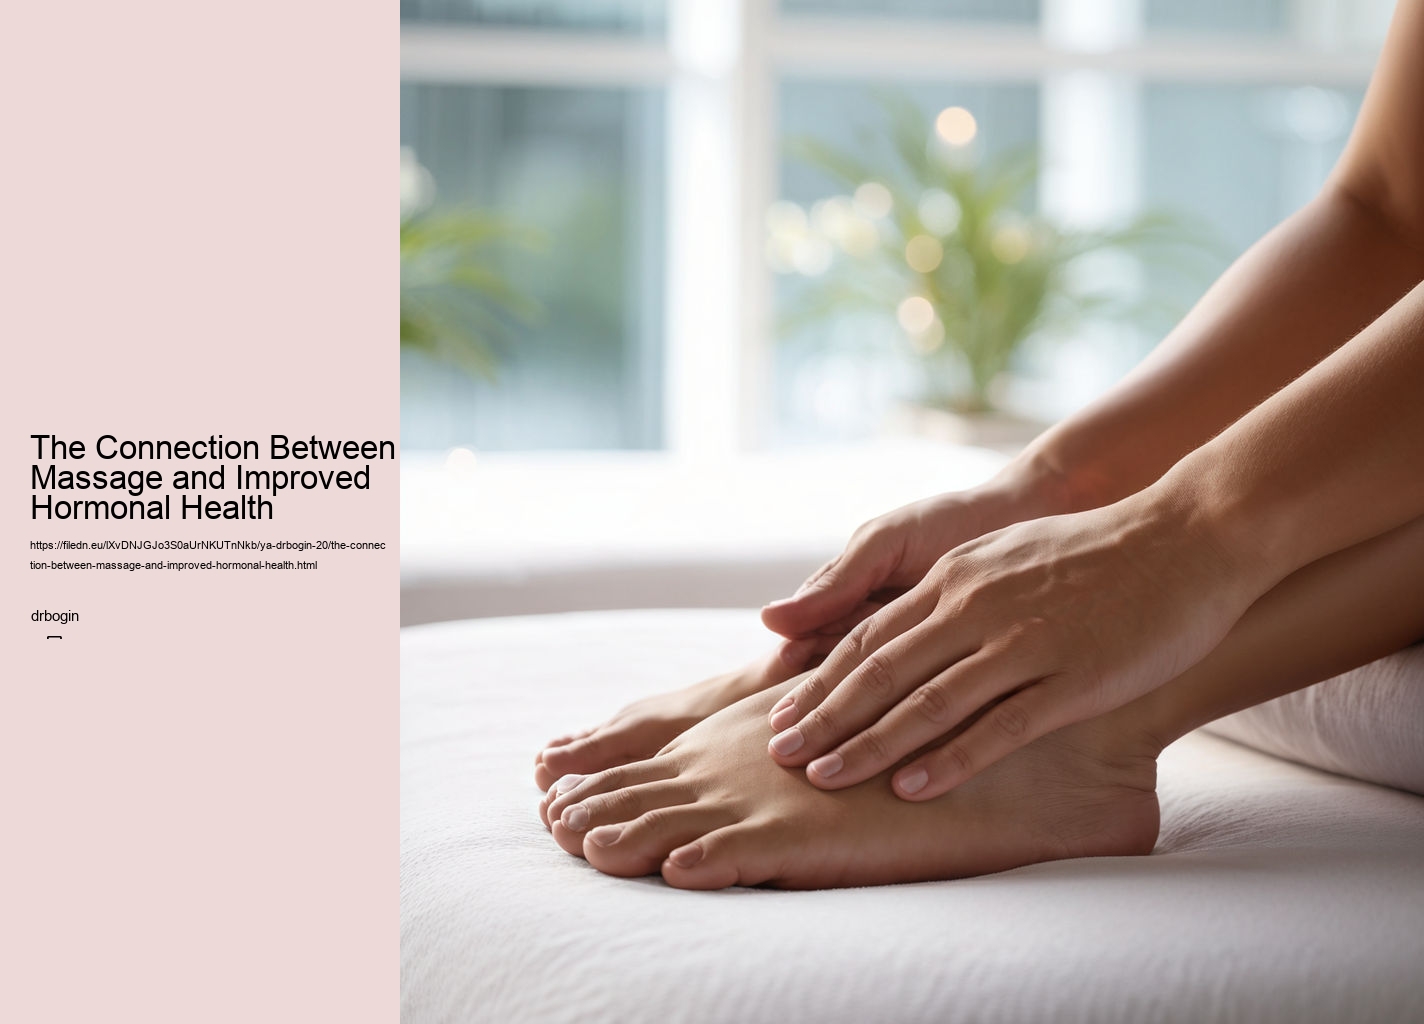 The Connection Between Massage and Improved Hormonal Health